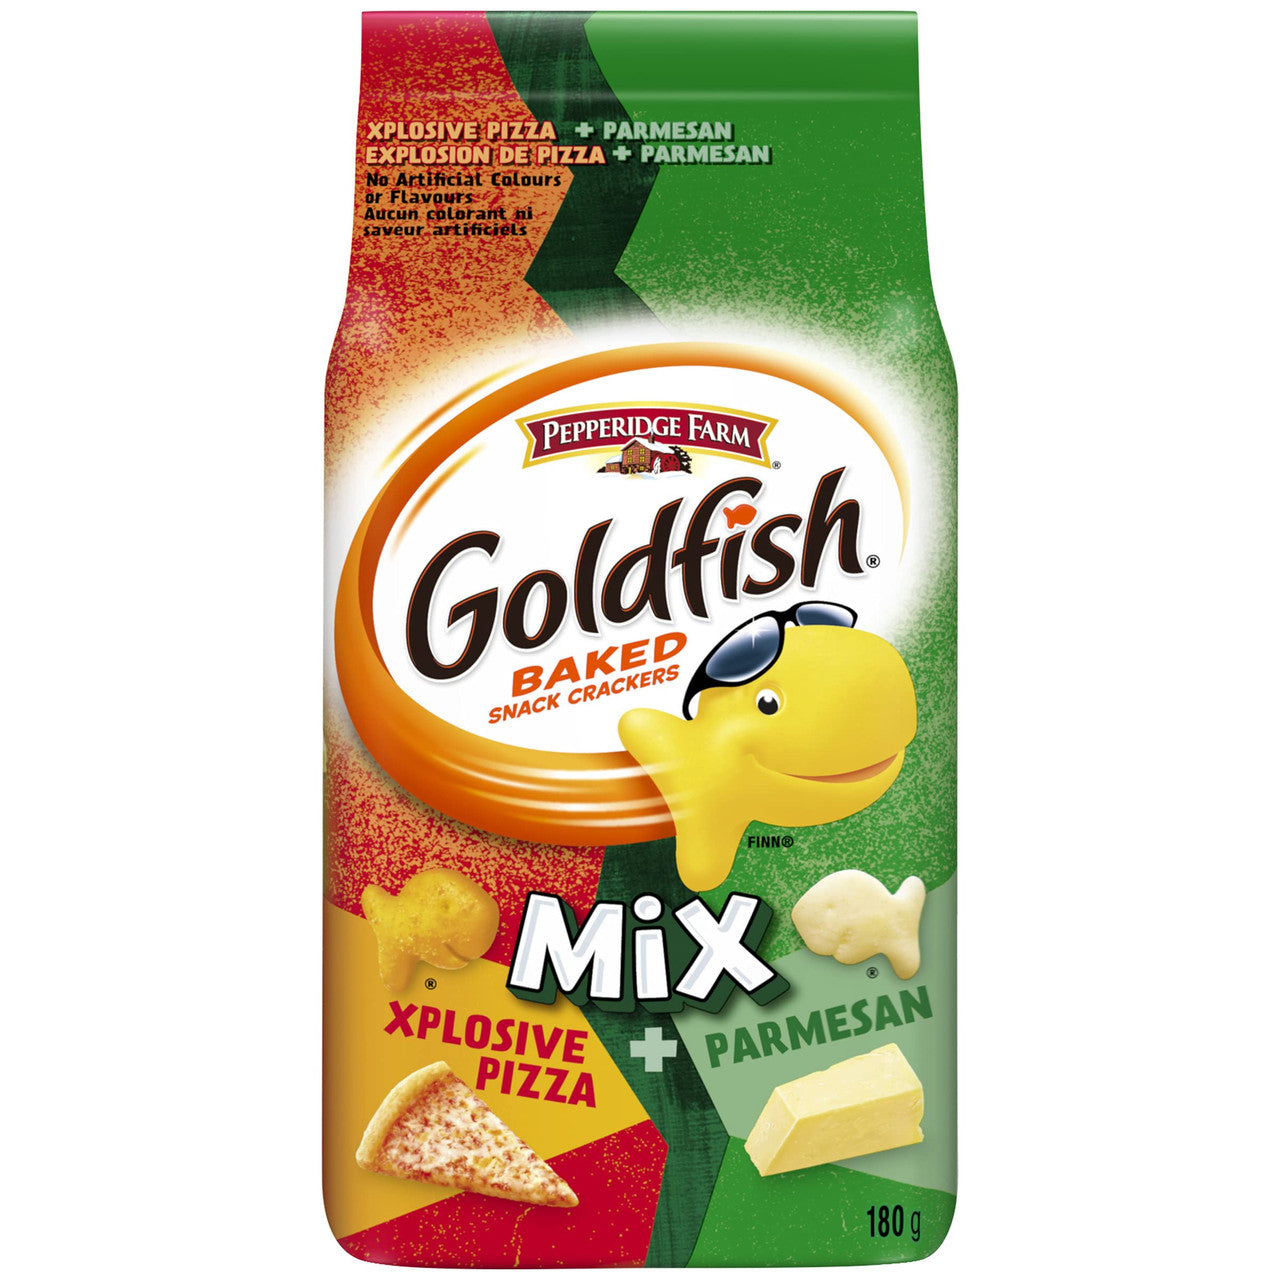 Pepperidge Farm Goldfish Mix Explosive Pizza & Parmesan Crackers, 180g/6.3 oz., {Imported from Canada}